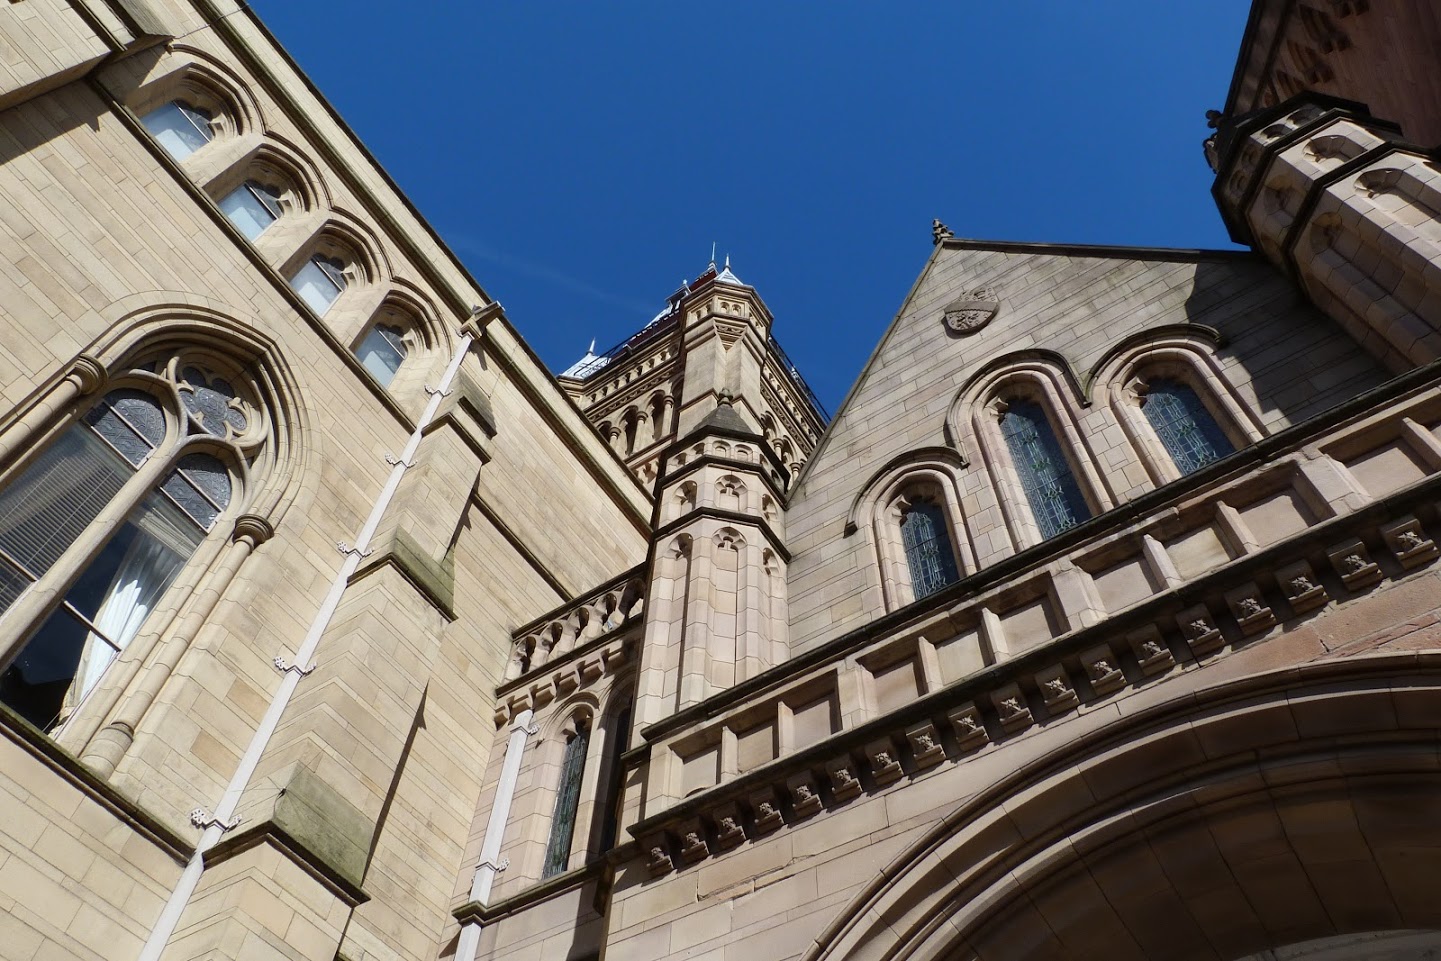 University of Manchester Main Building